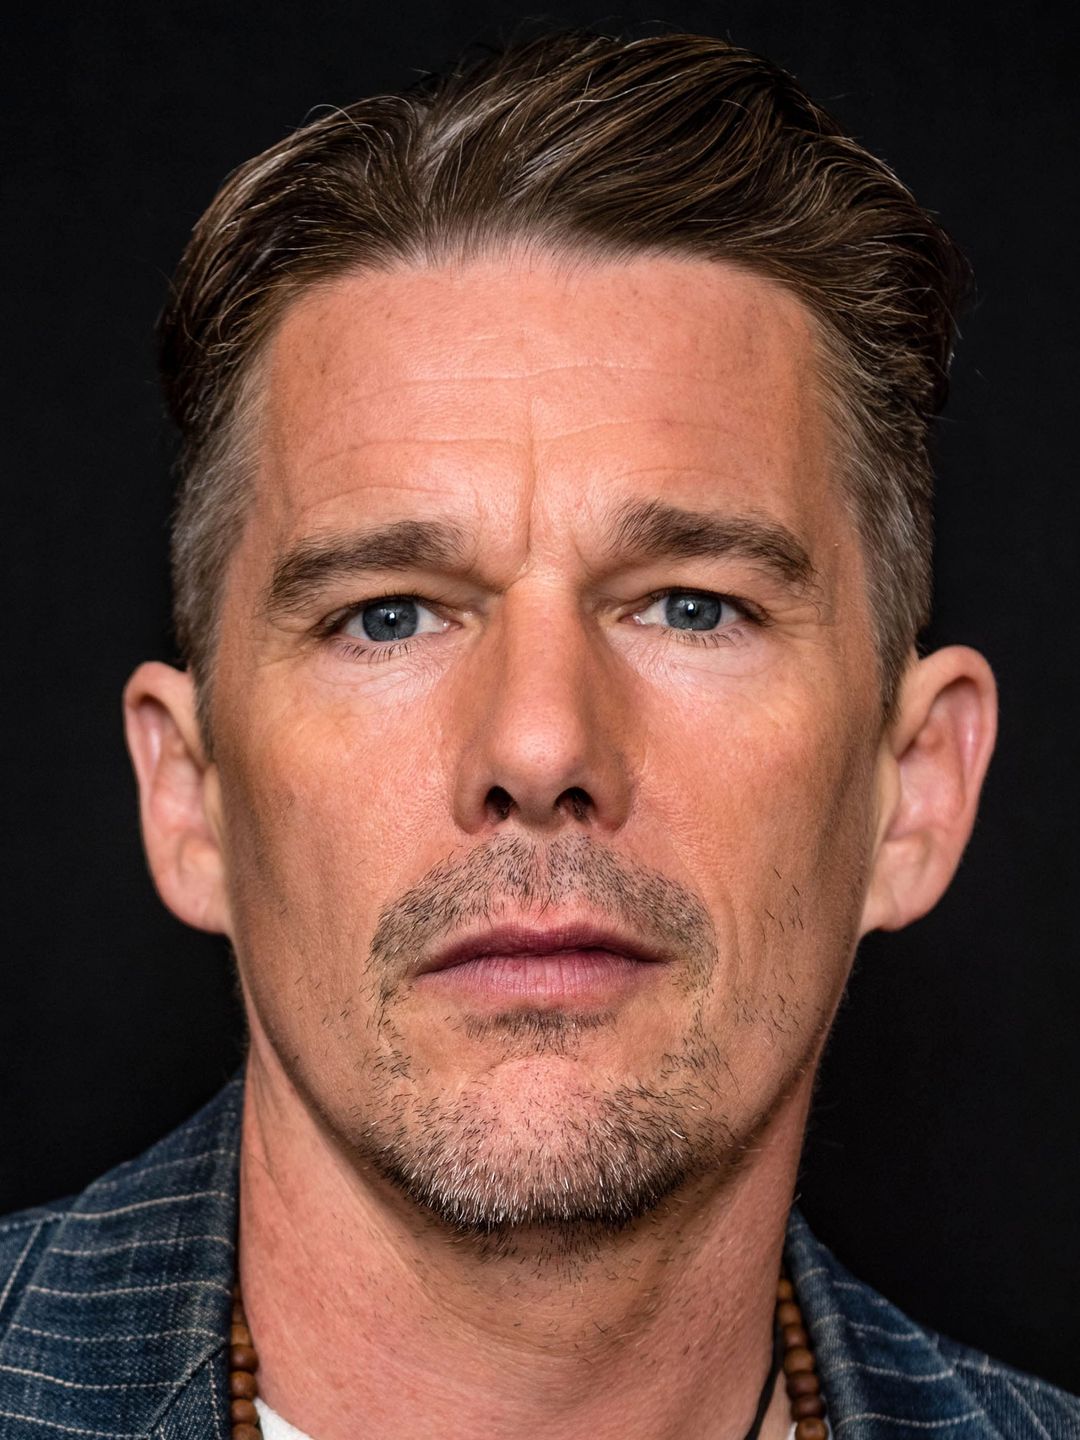 Ethan Hawke who is his father